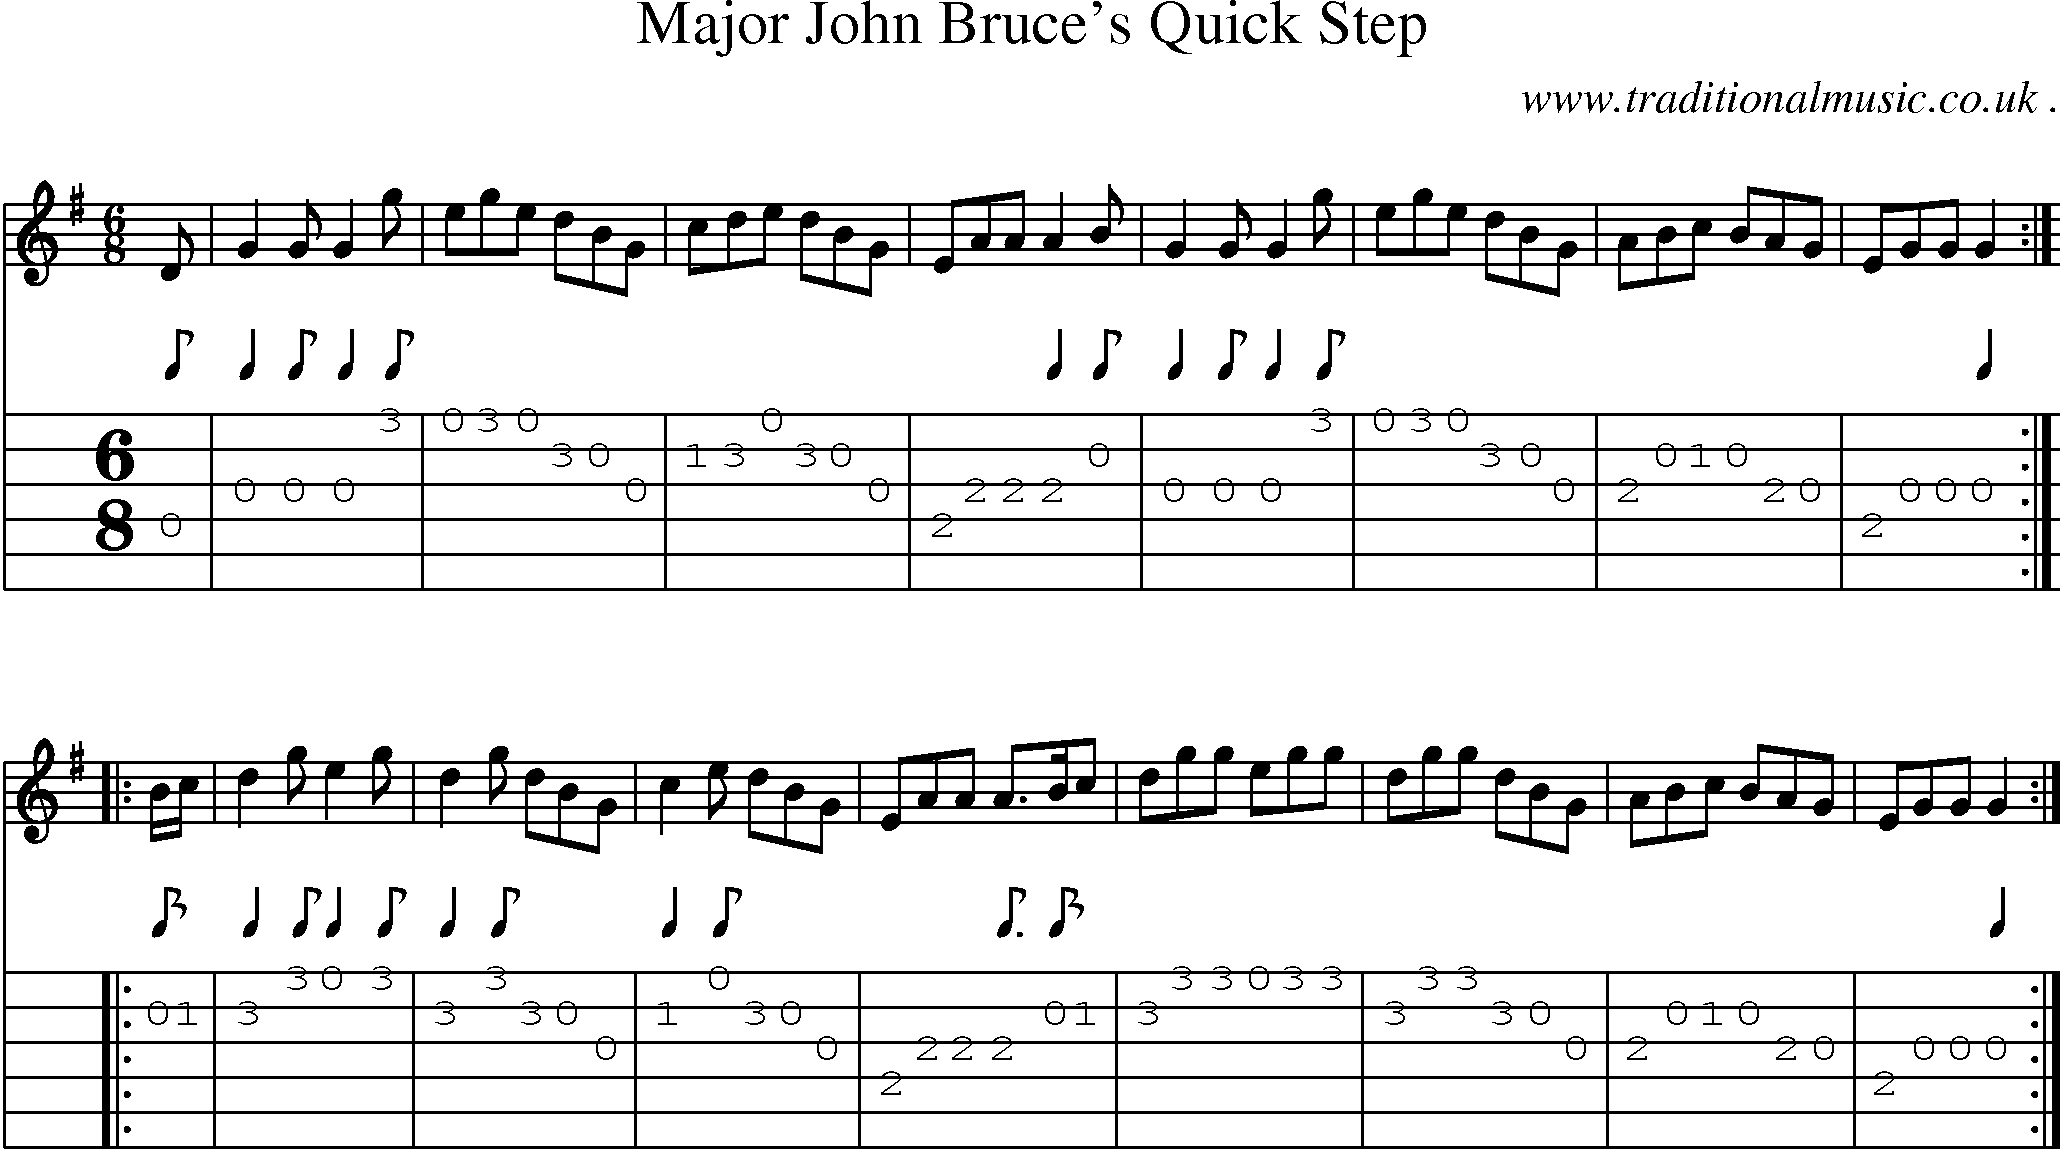 Sheet-Music and Guitar Tabs for Major John Bruces Quick Step